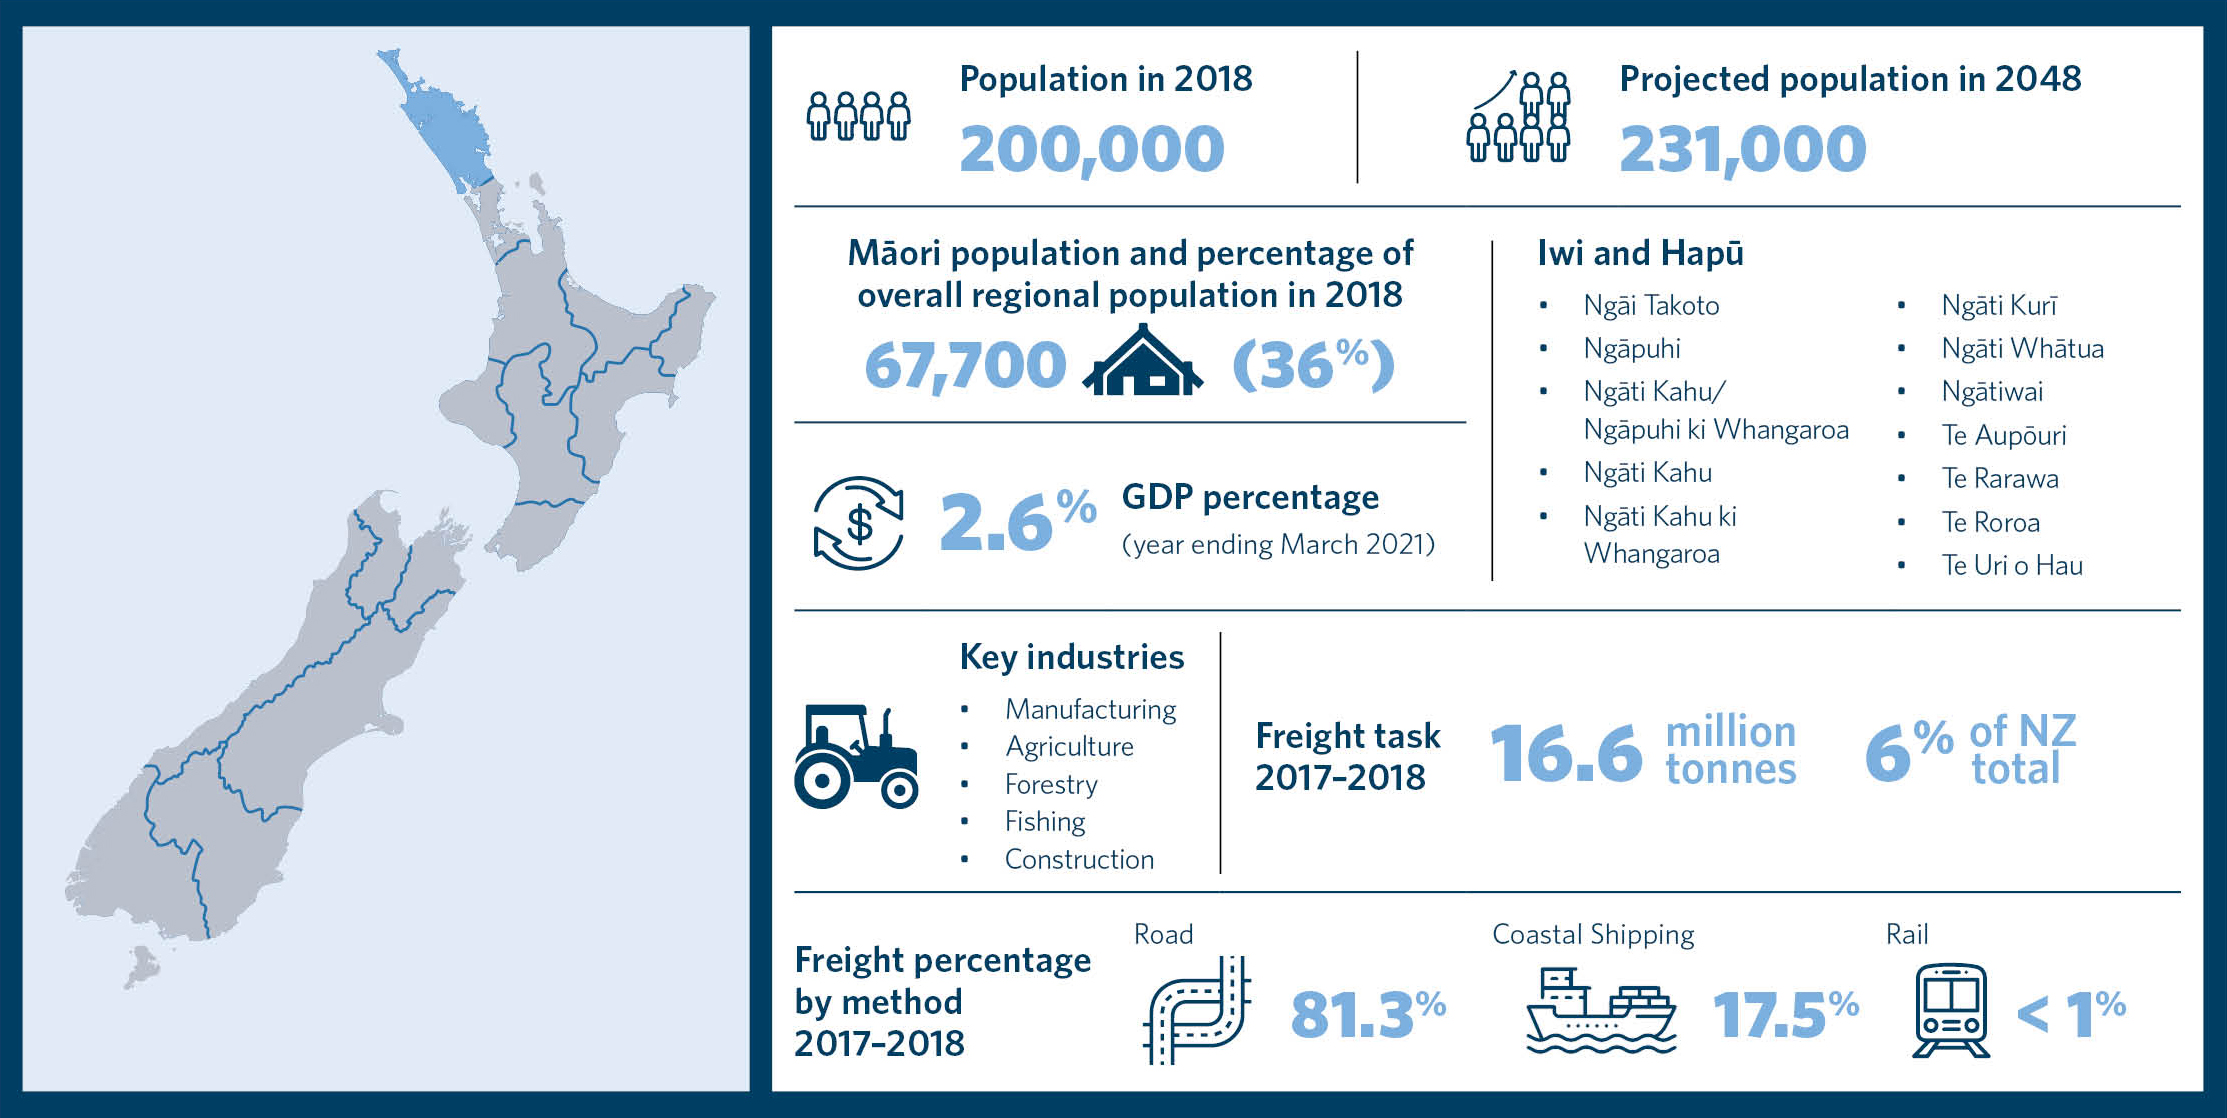 This is an infographic showing statistics for the region of Te Tai Tokerau Northland. It includes information about the population in 2018, projected population in 2048, Māori population and percentage of overall regional population in 2018, a list of iwi